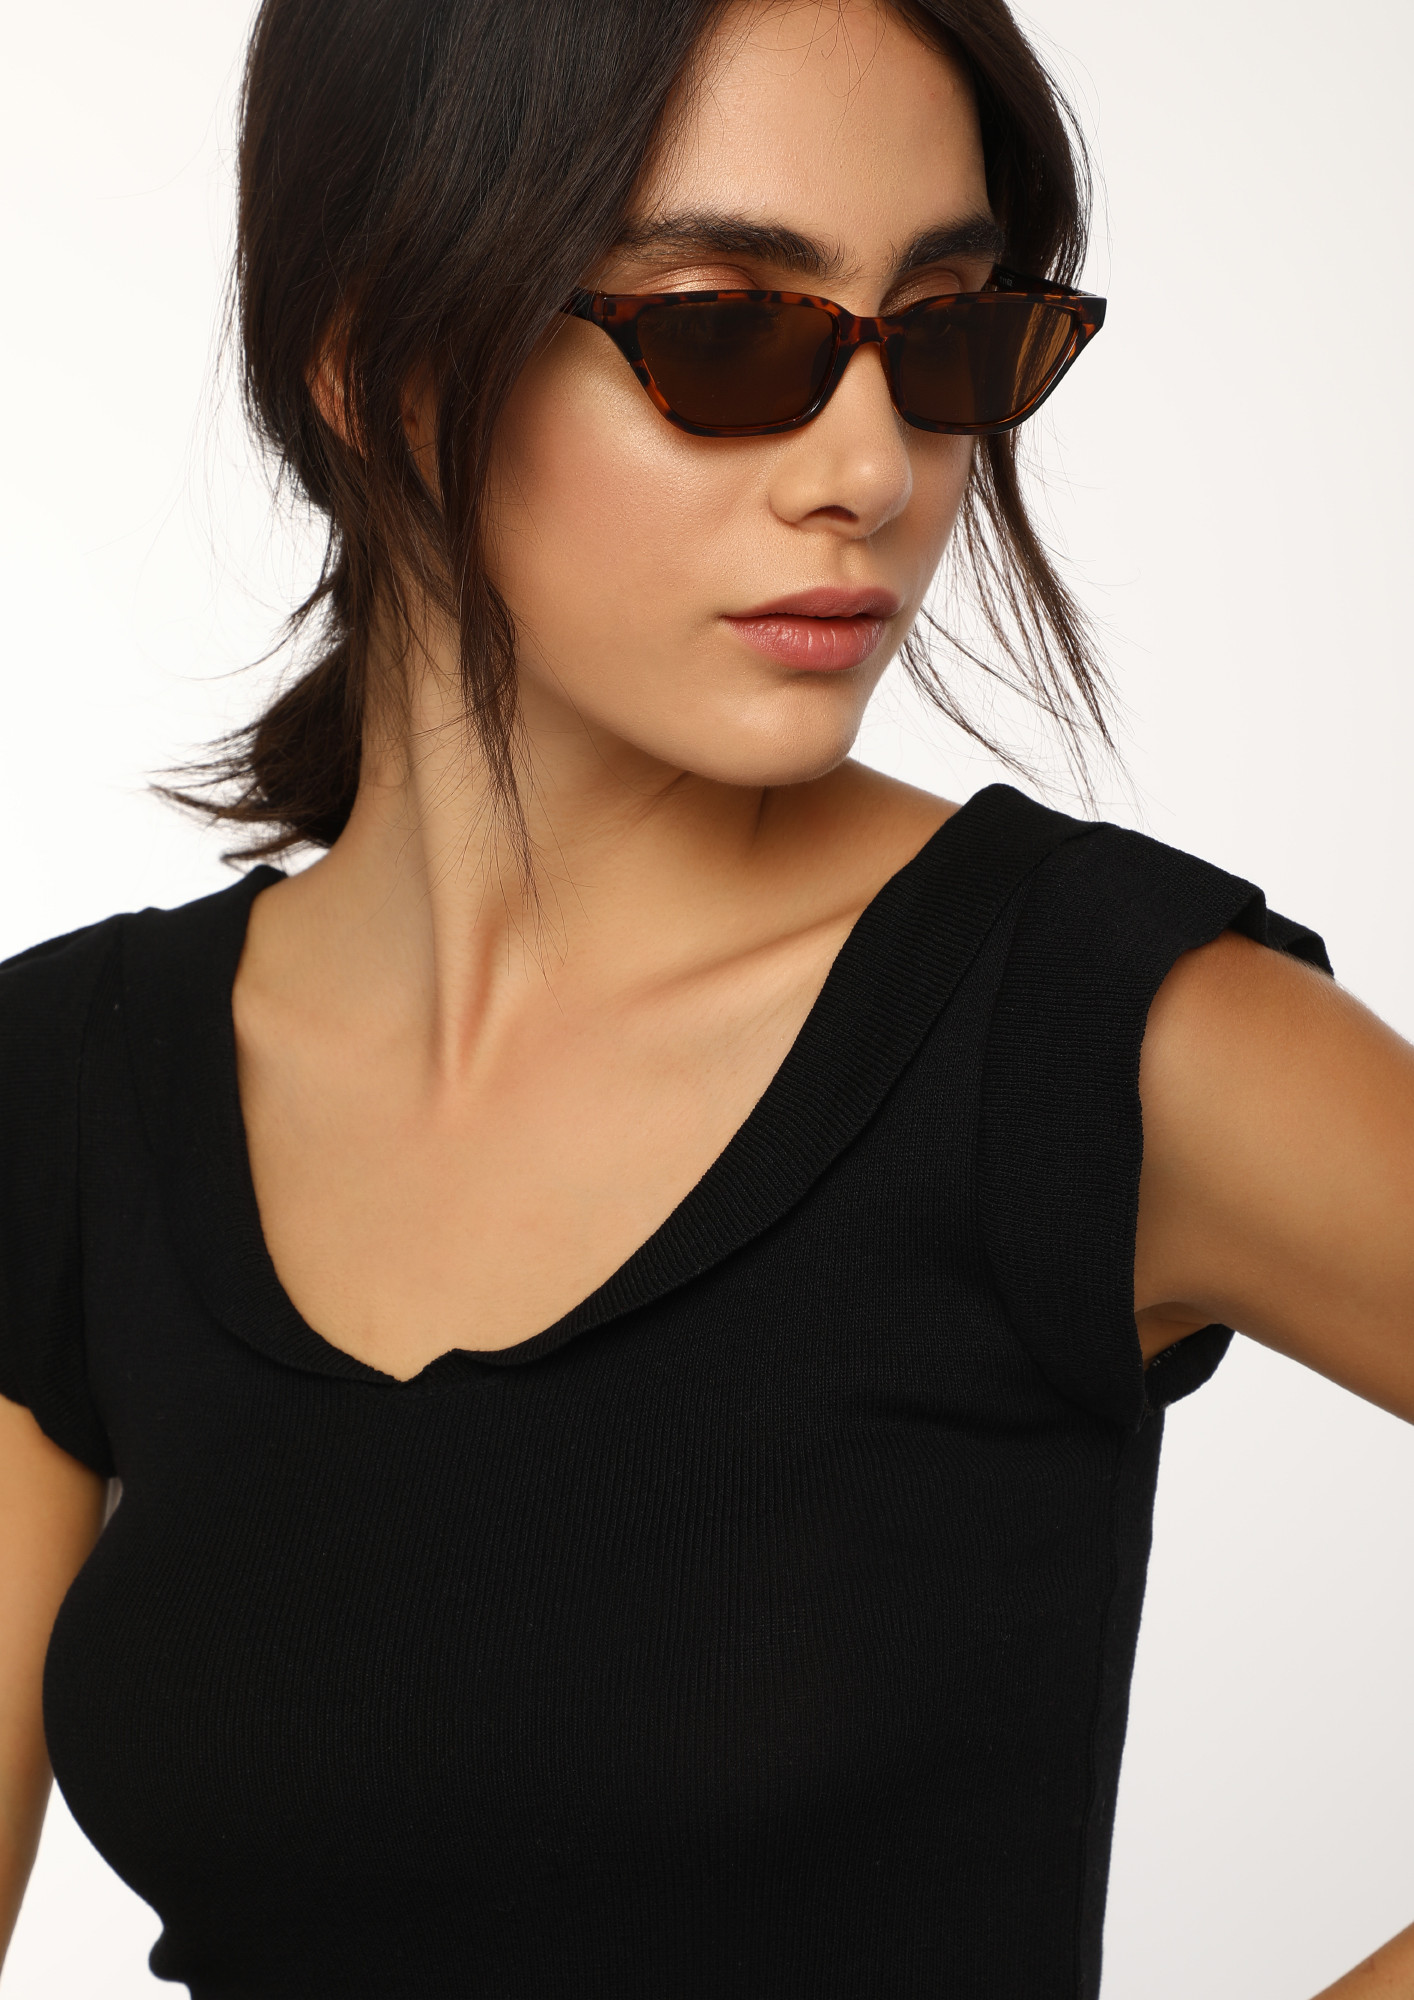 SHAPES TO PERFECTION BROWN SUNGLASSES